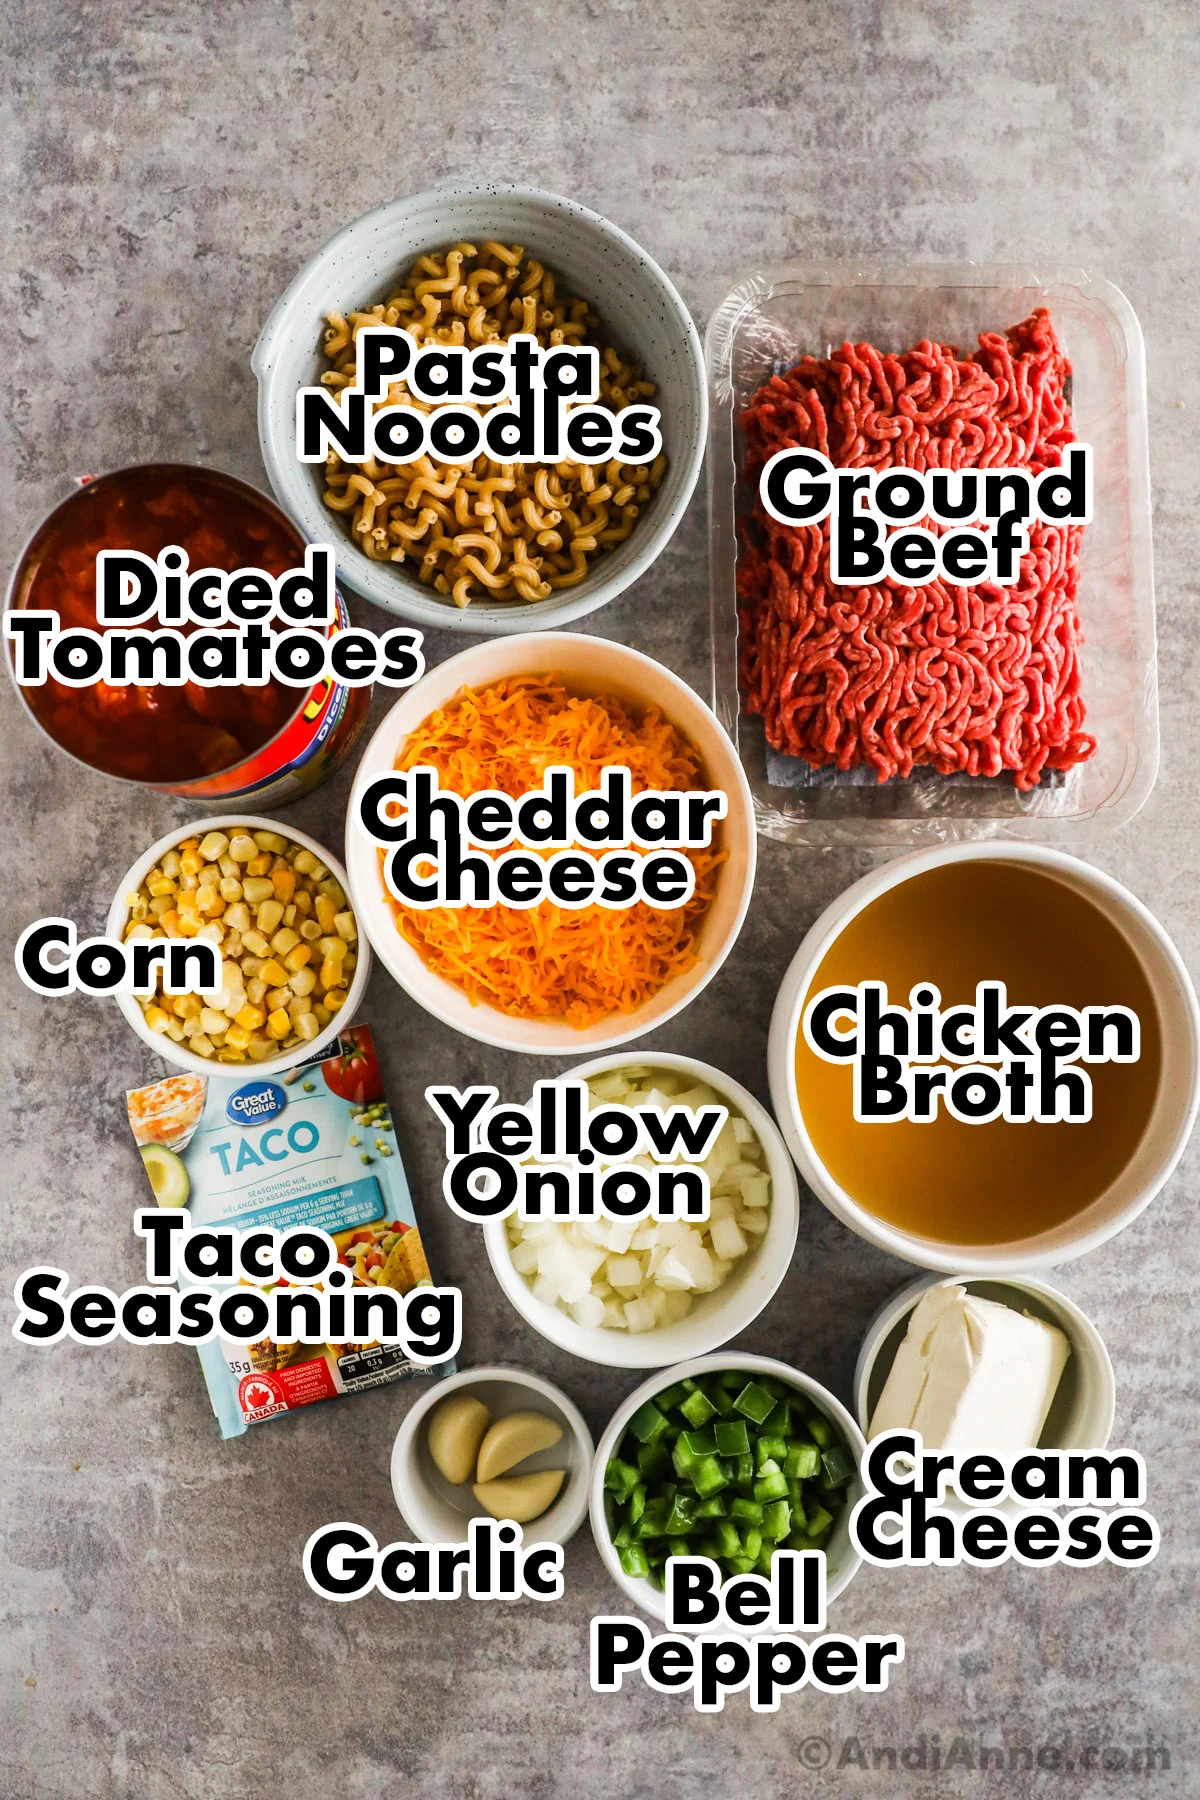 Recipe ingredients on the counter including raw ground beef, bowls of pasta noodles, diced tomatoes, cheese, corn, broth, onion, taco seasoning, cream cheese, and chopped bell pepper.